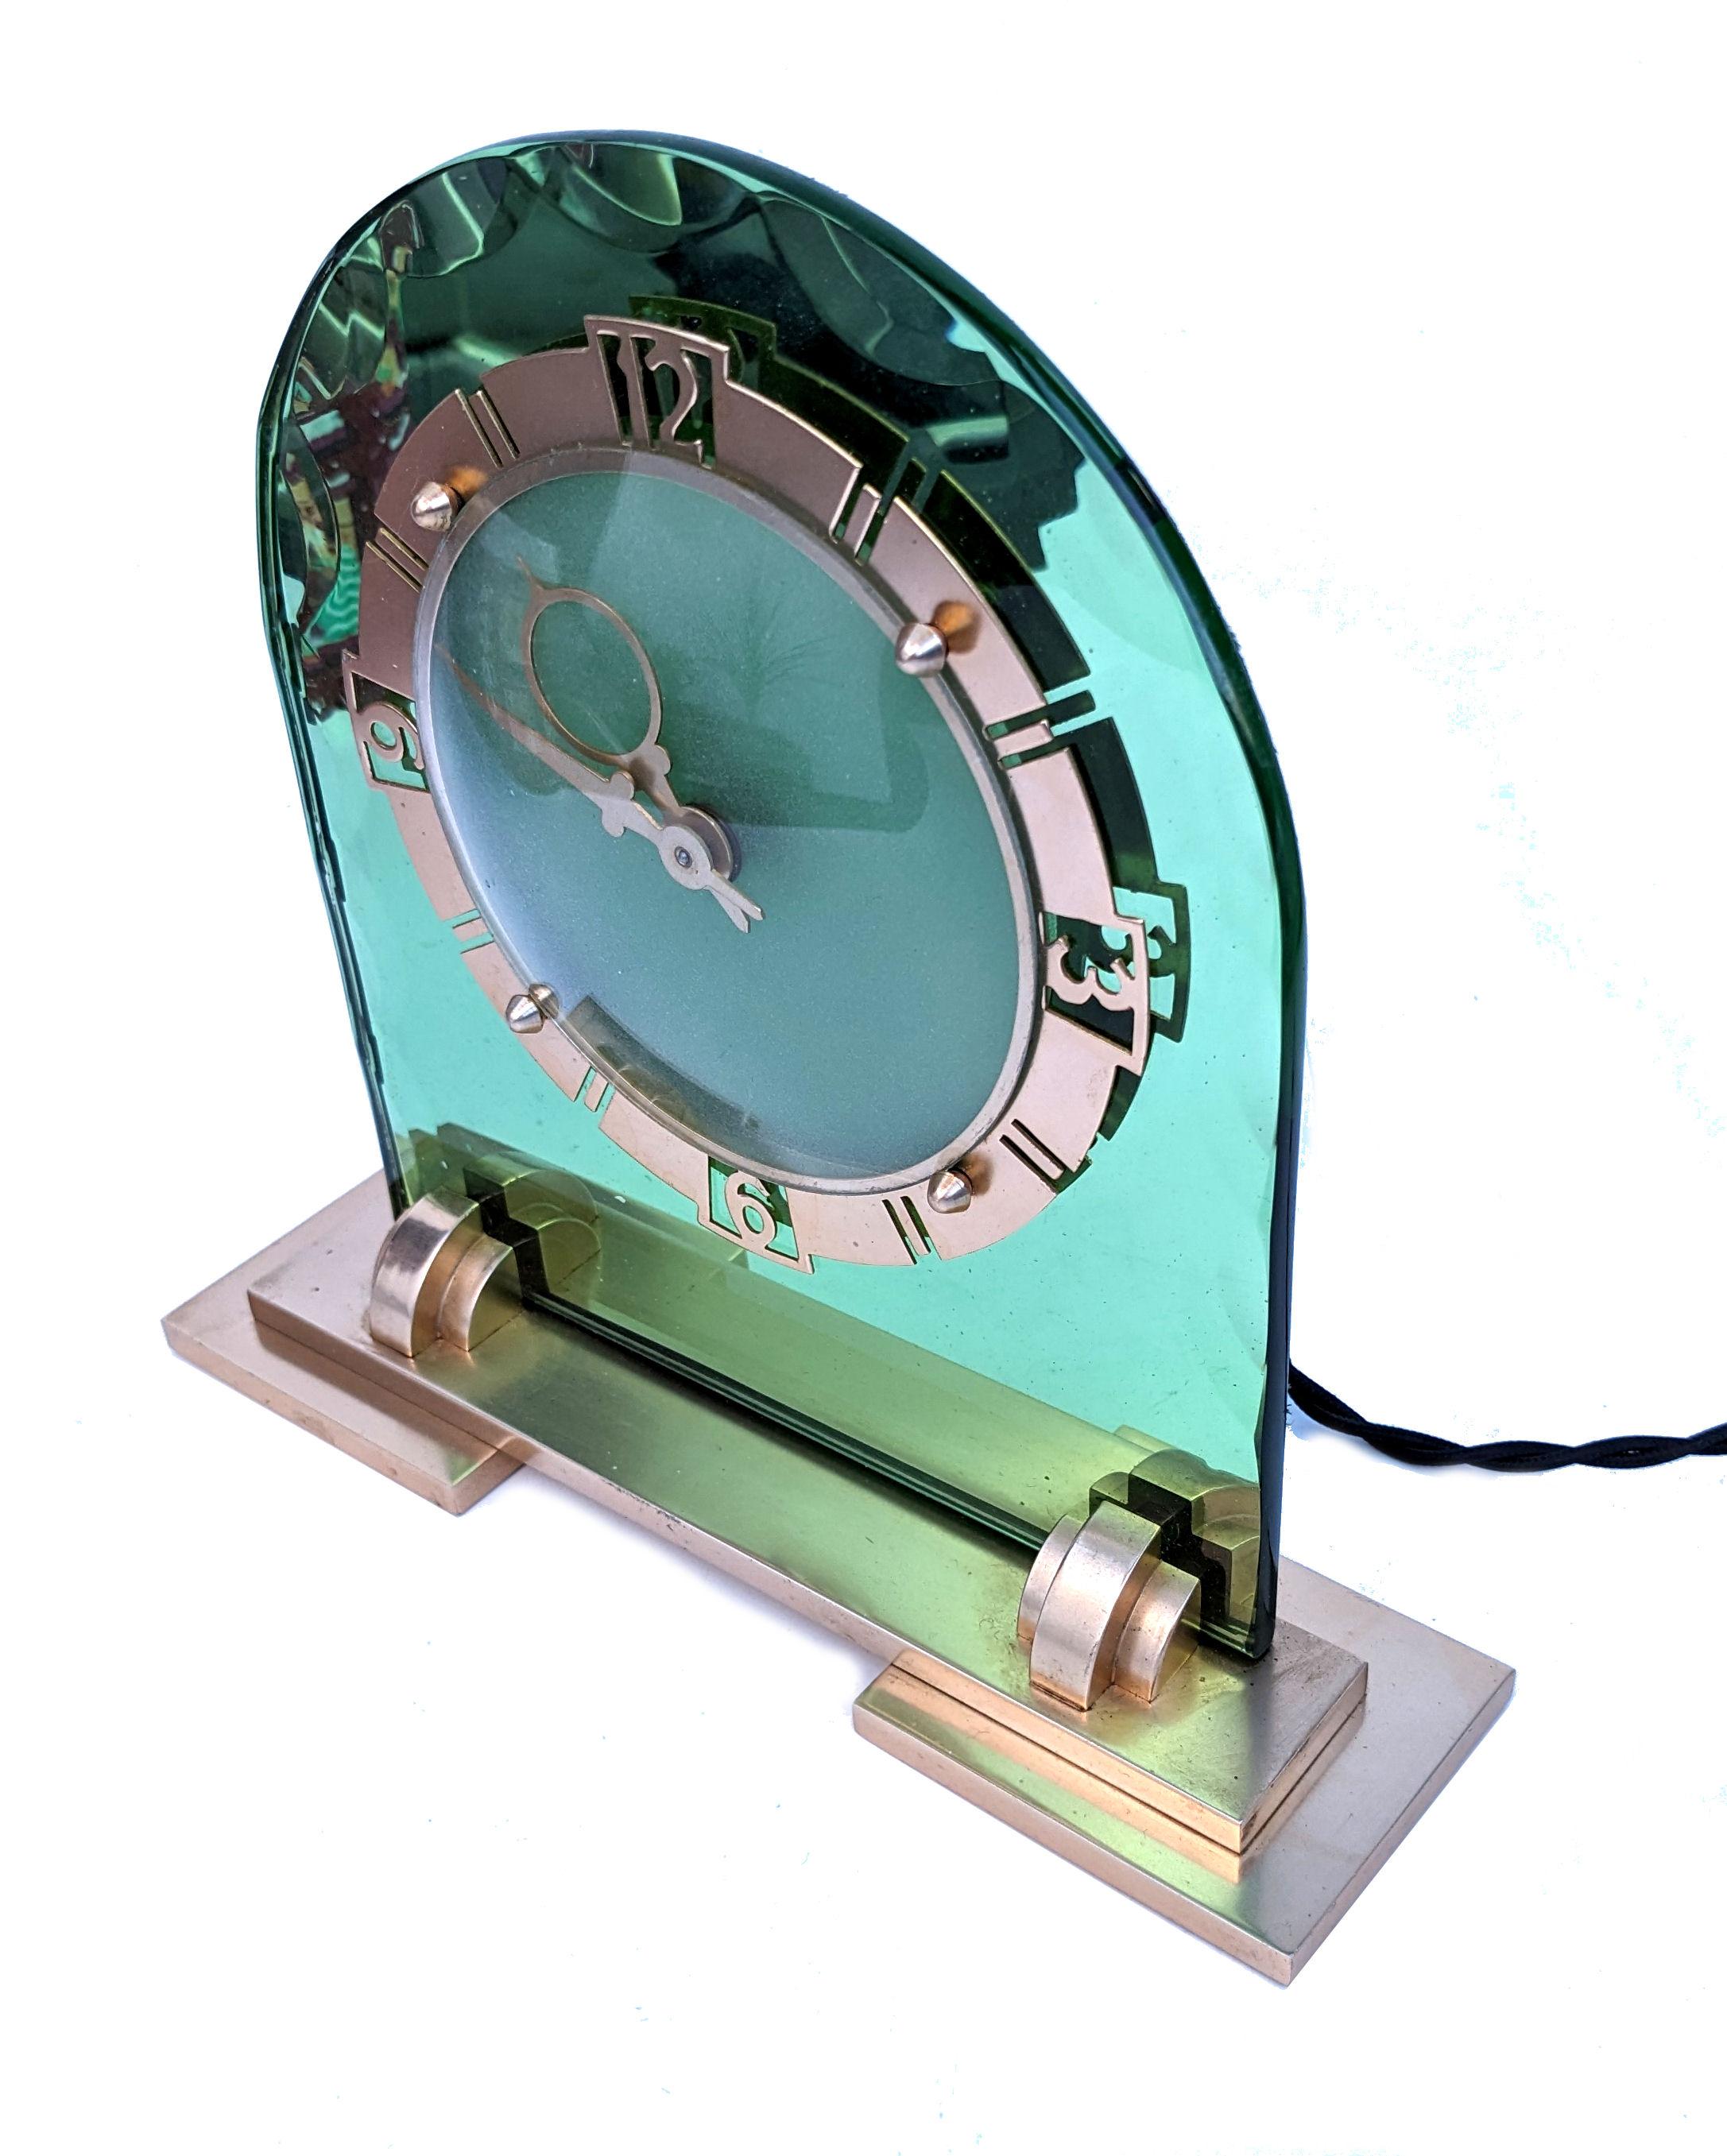 Art Deco Glamourous Green Mirror & Brass Clock, English, c1930 In Good Condition For Sale In Devon, England